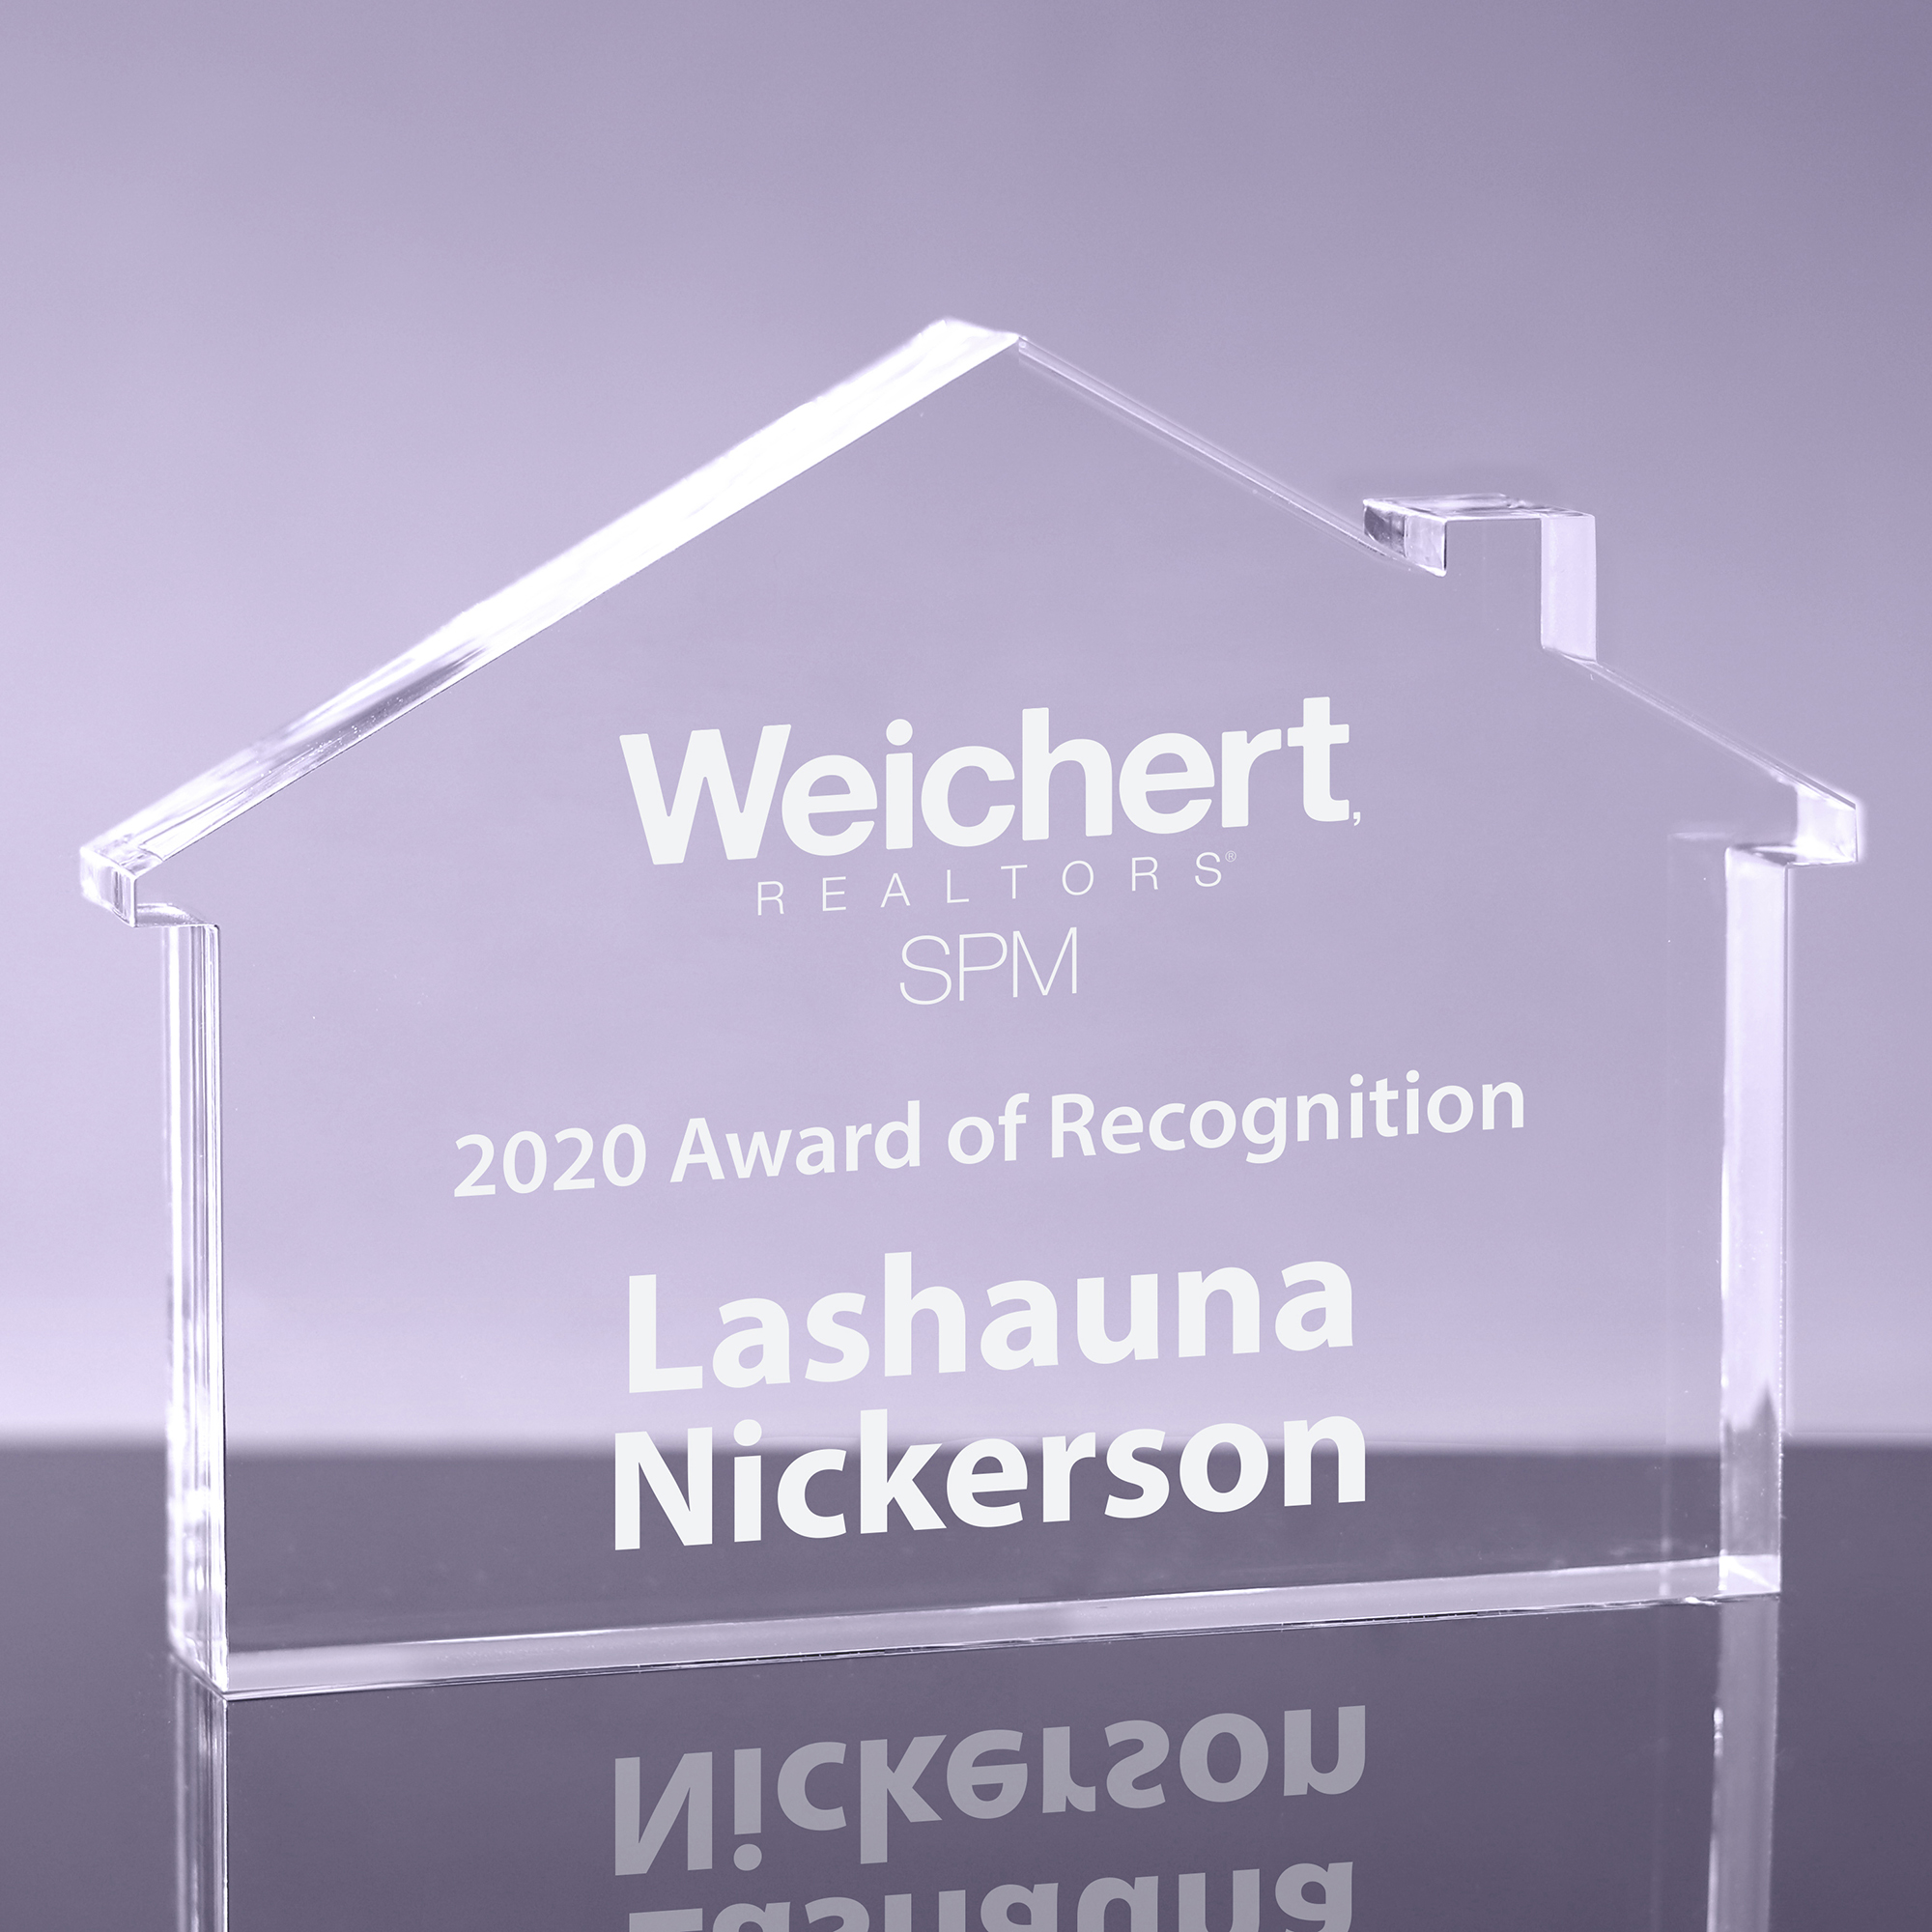 1 inch Thick Acrylic Single Gable Real Estate/Home Award - 6 x 8.375 inch